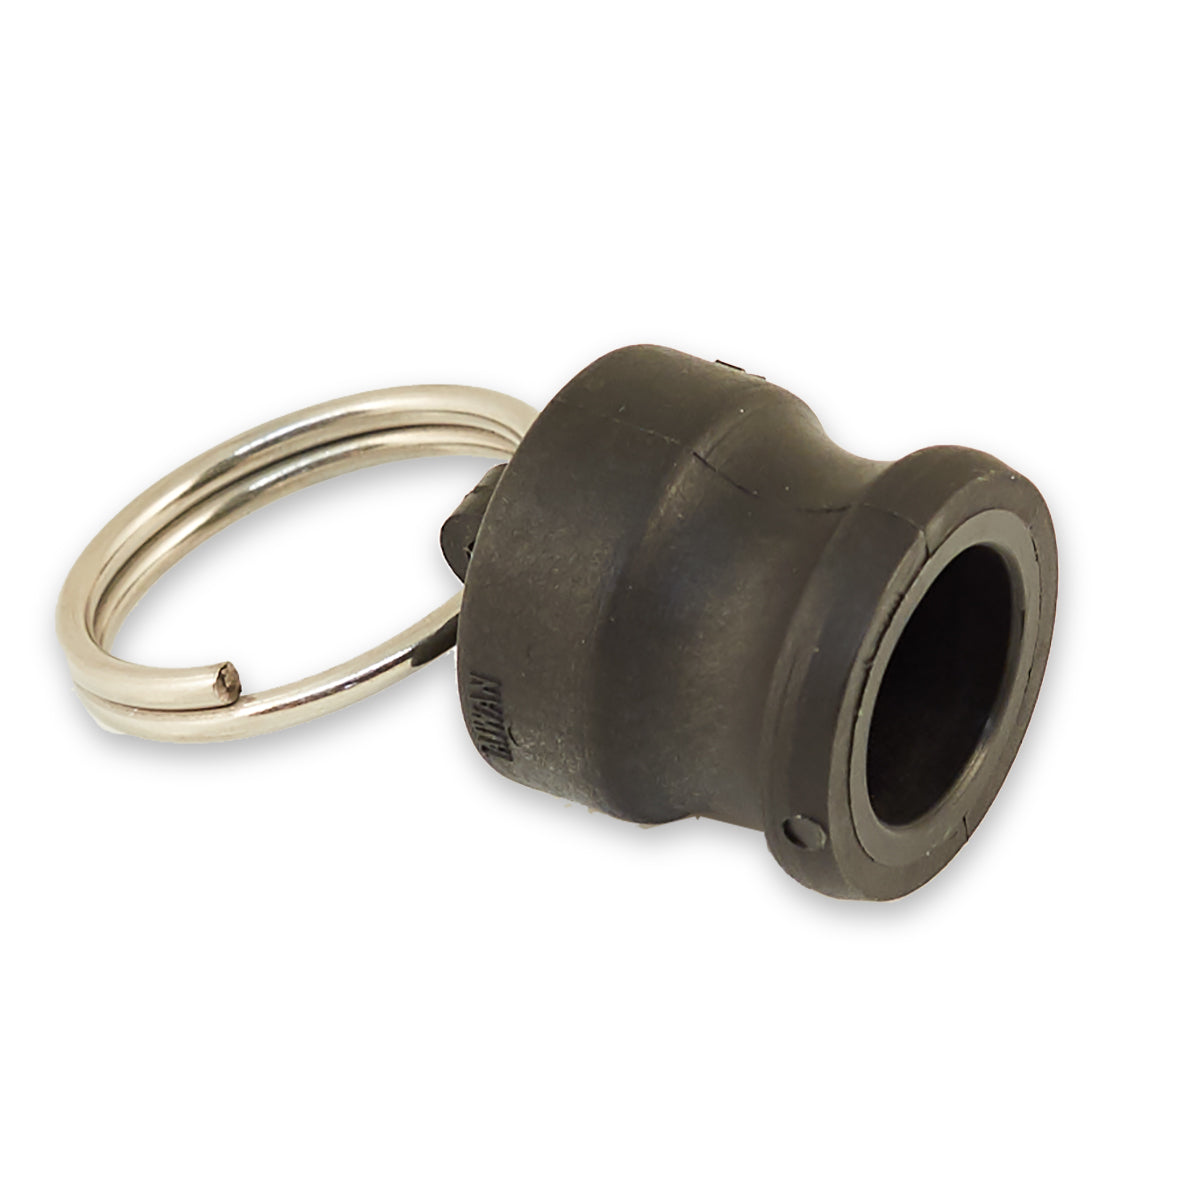 M-126 Male Adapter Plug 1/2" or 3/4"